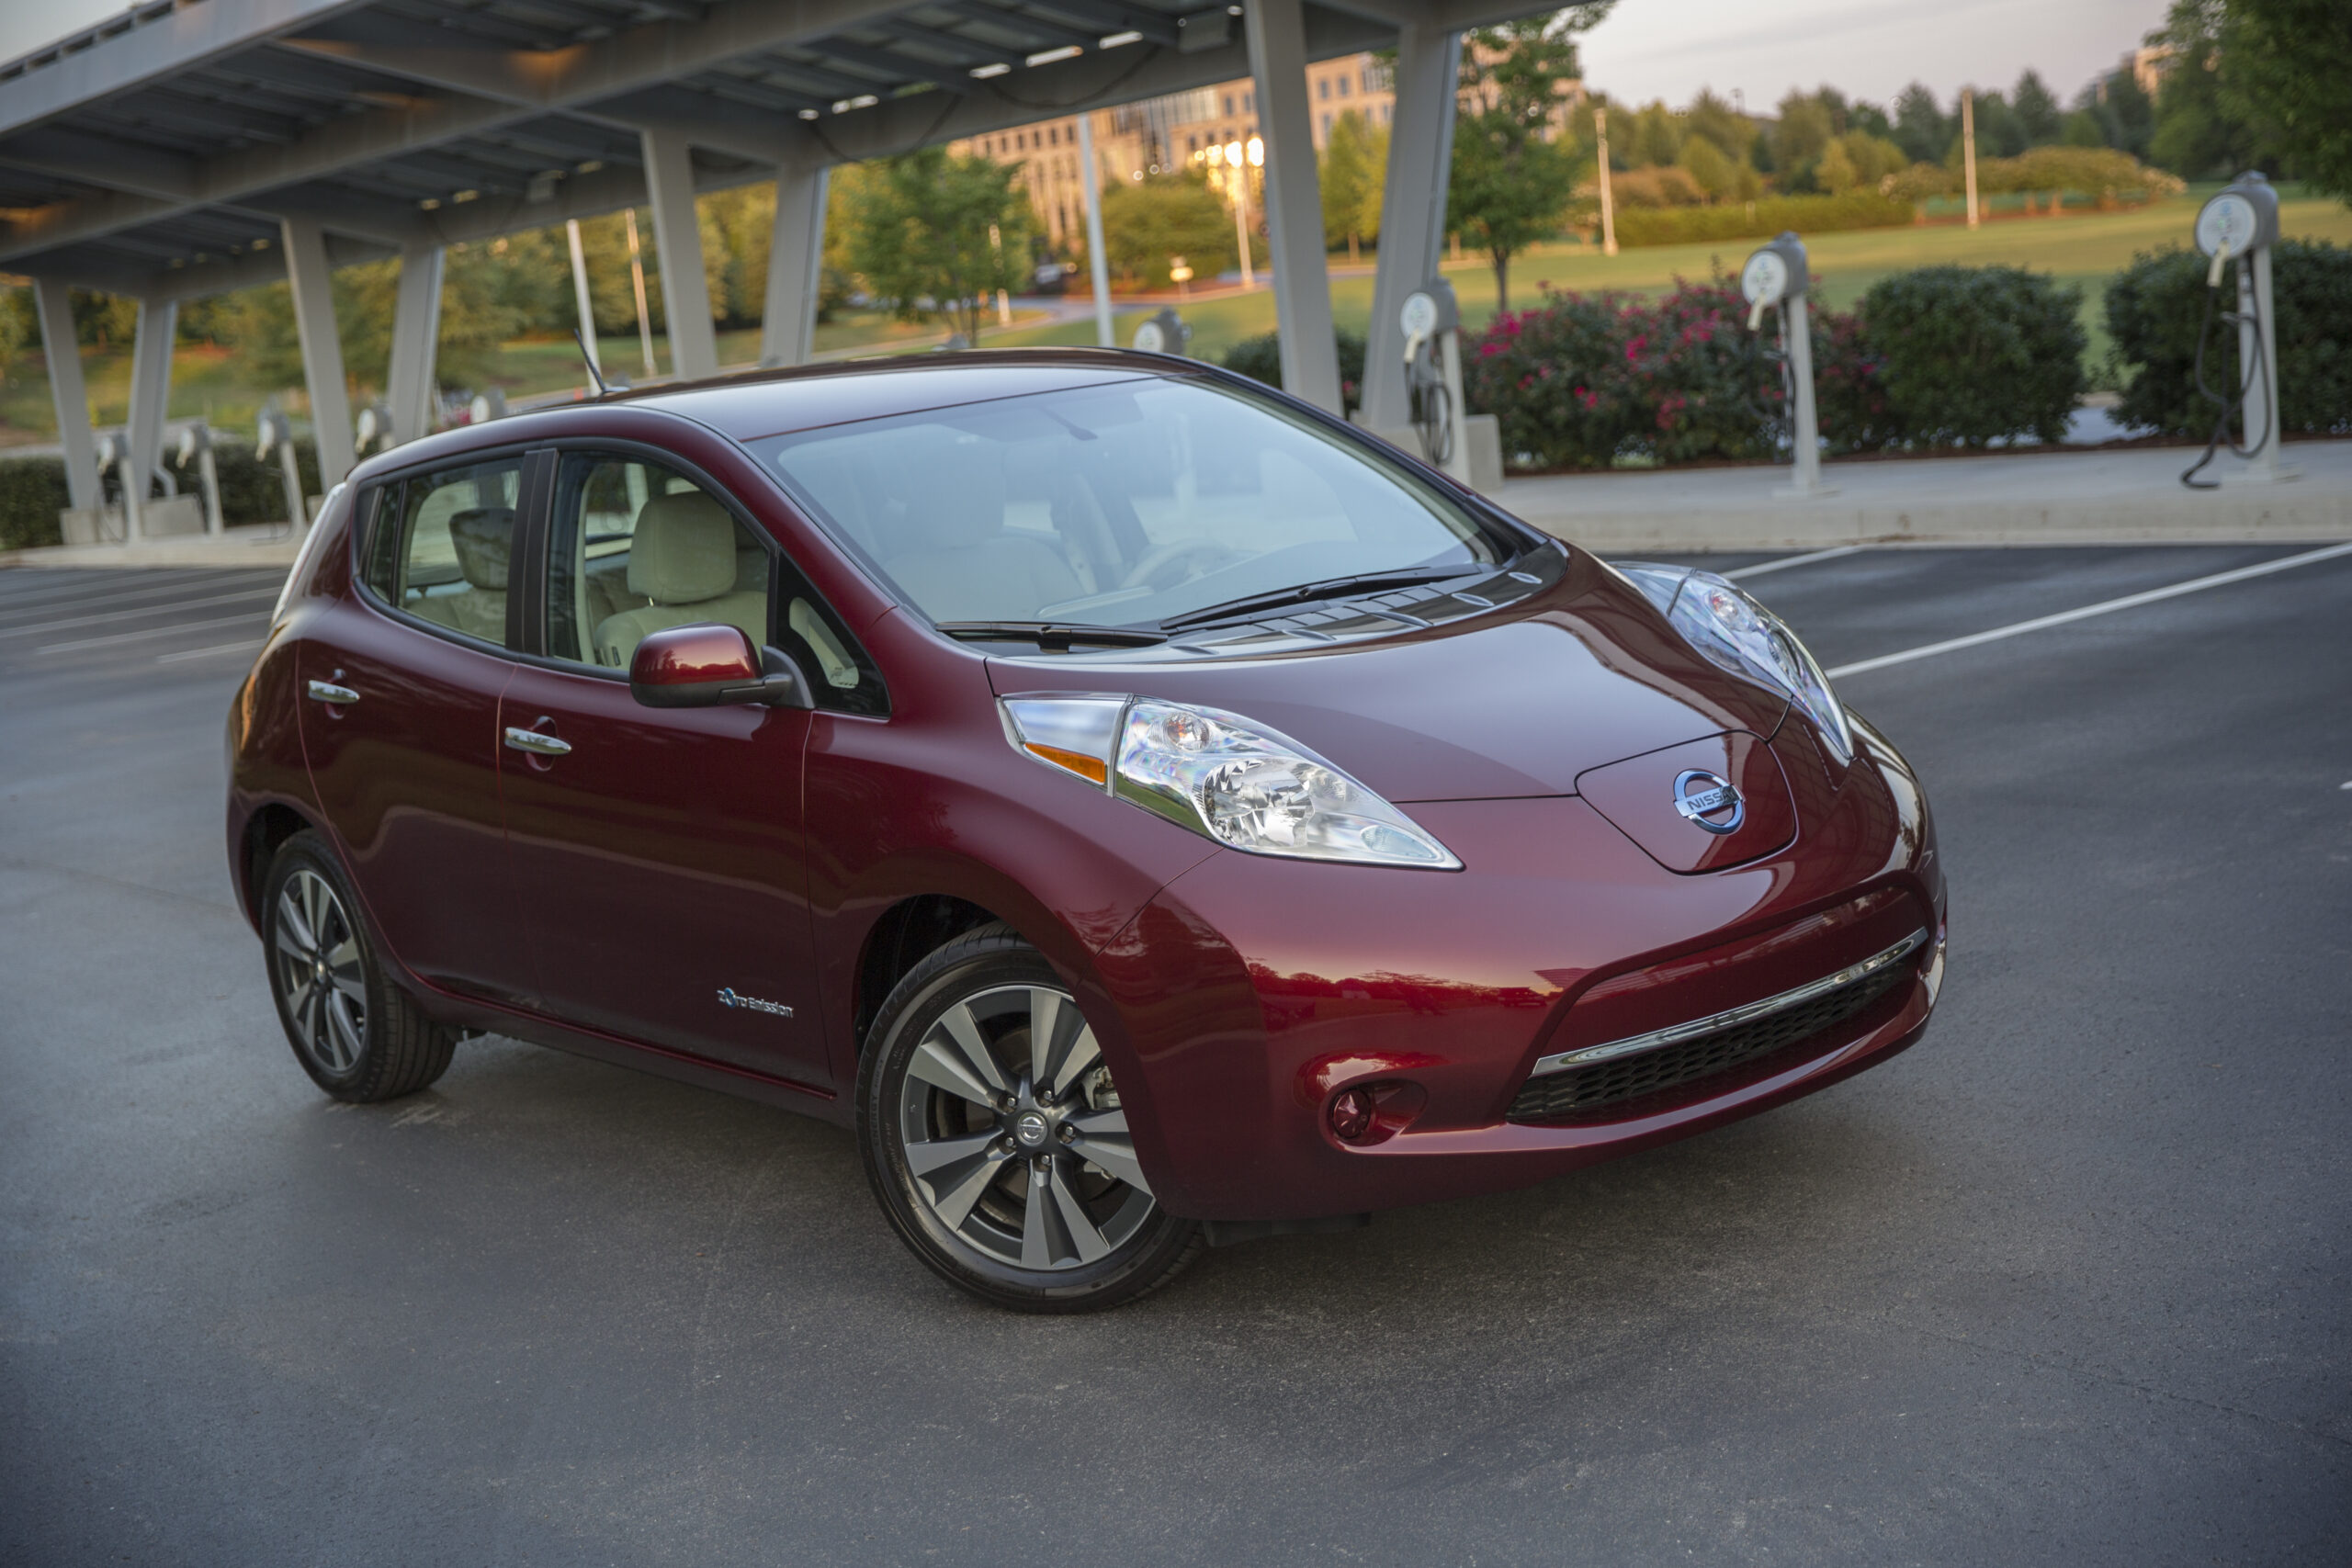 Want to kick your gas habit? Nissan will help